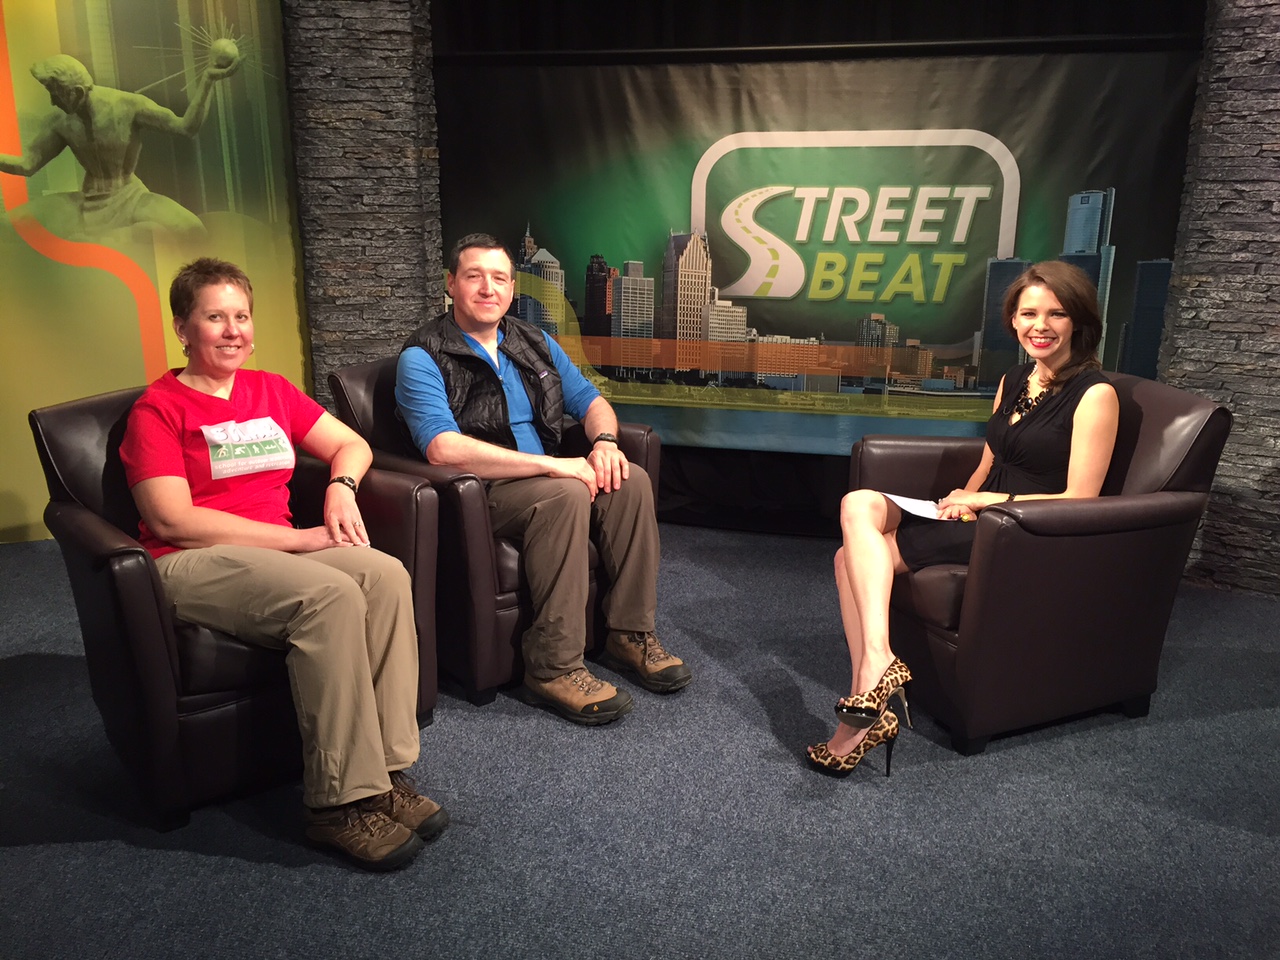 Jennifer Tislerics and Jeff McWilliams from SOLAR, the School for Outdoor Leadership, Adventure and Recreation; and Street Beat host Karen Carter. (credit: Ken Bryant/CW50)